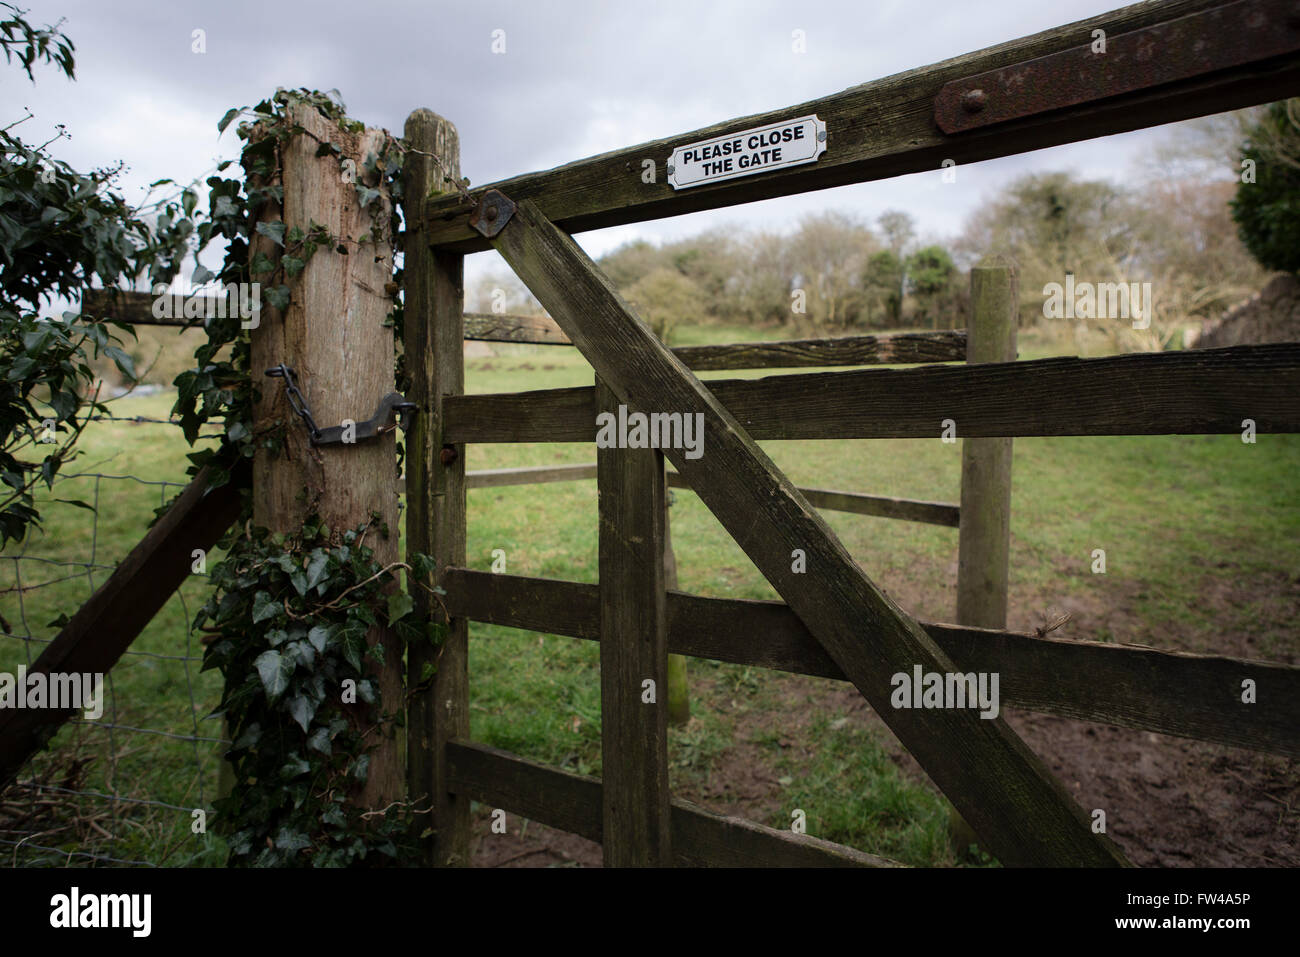 Old wooden gate entering a farmer's field with a please shut the gate sign on it. Stock Photo